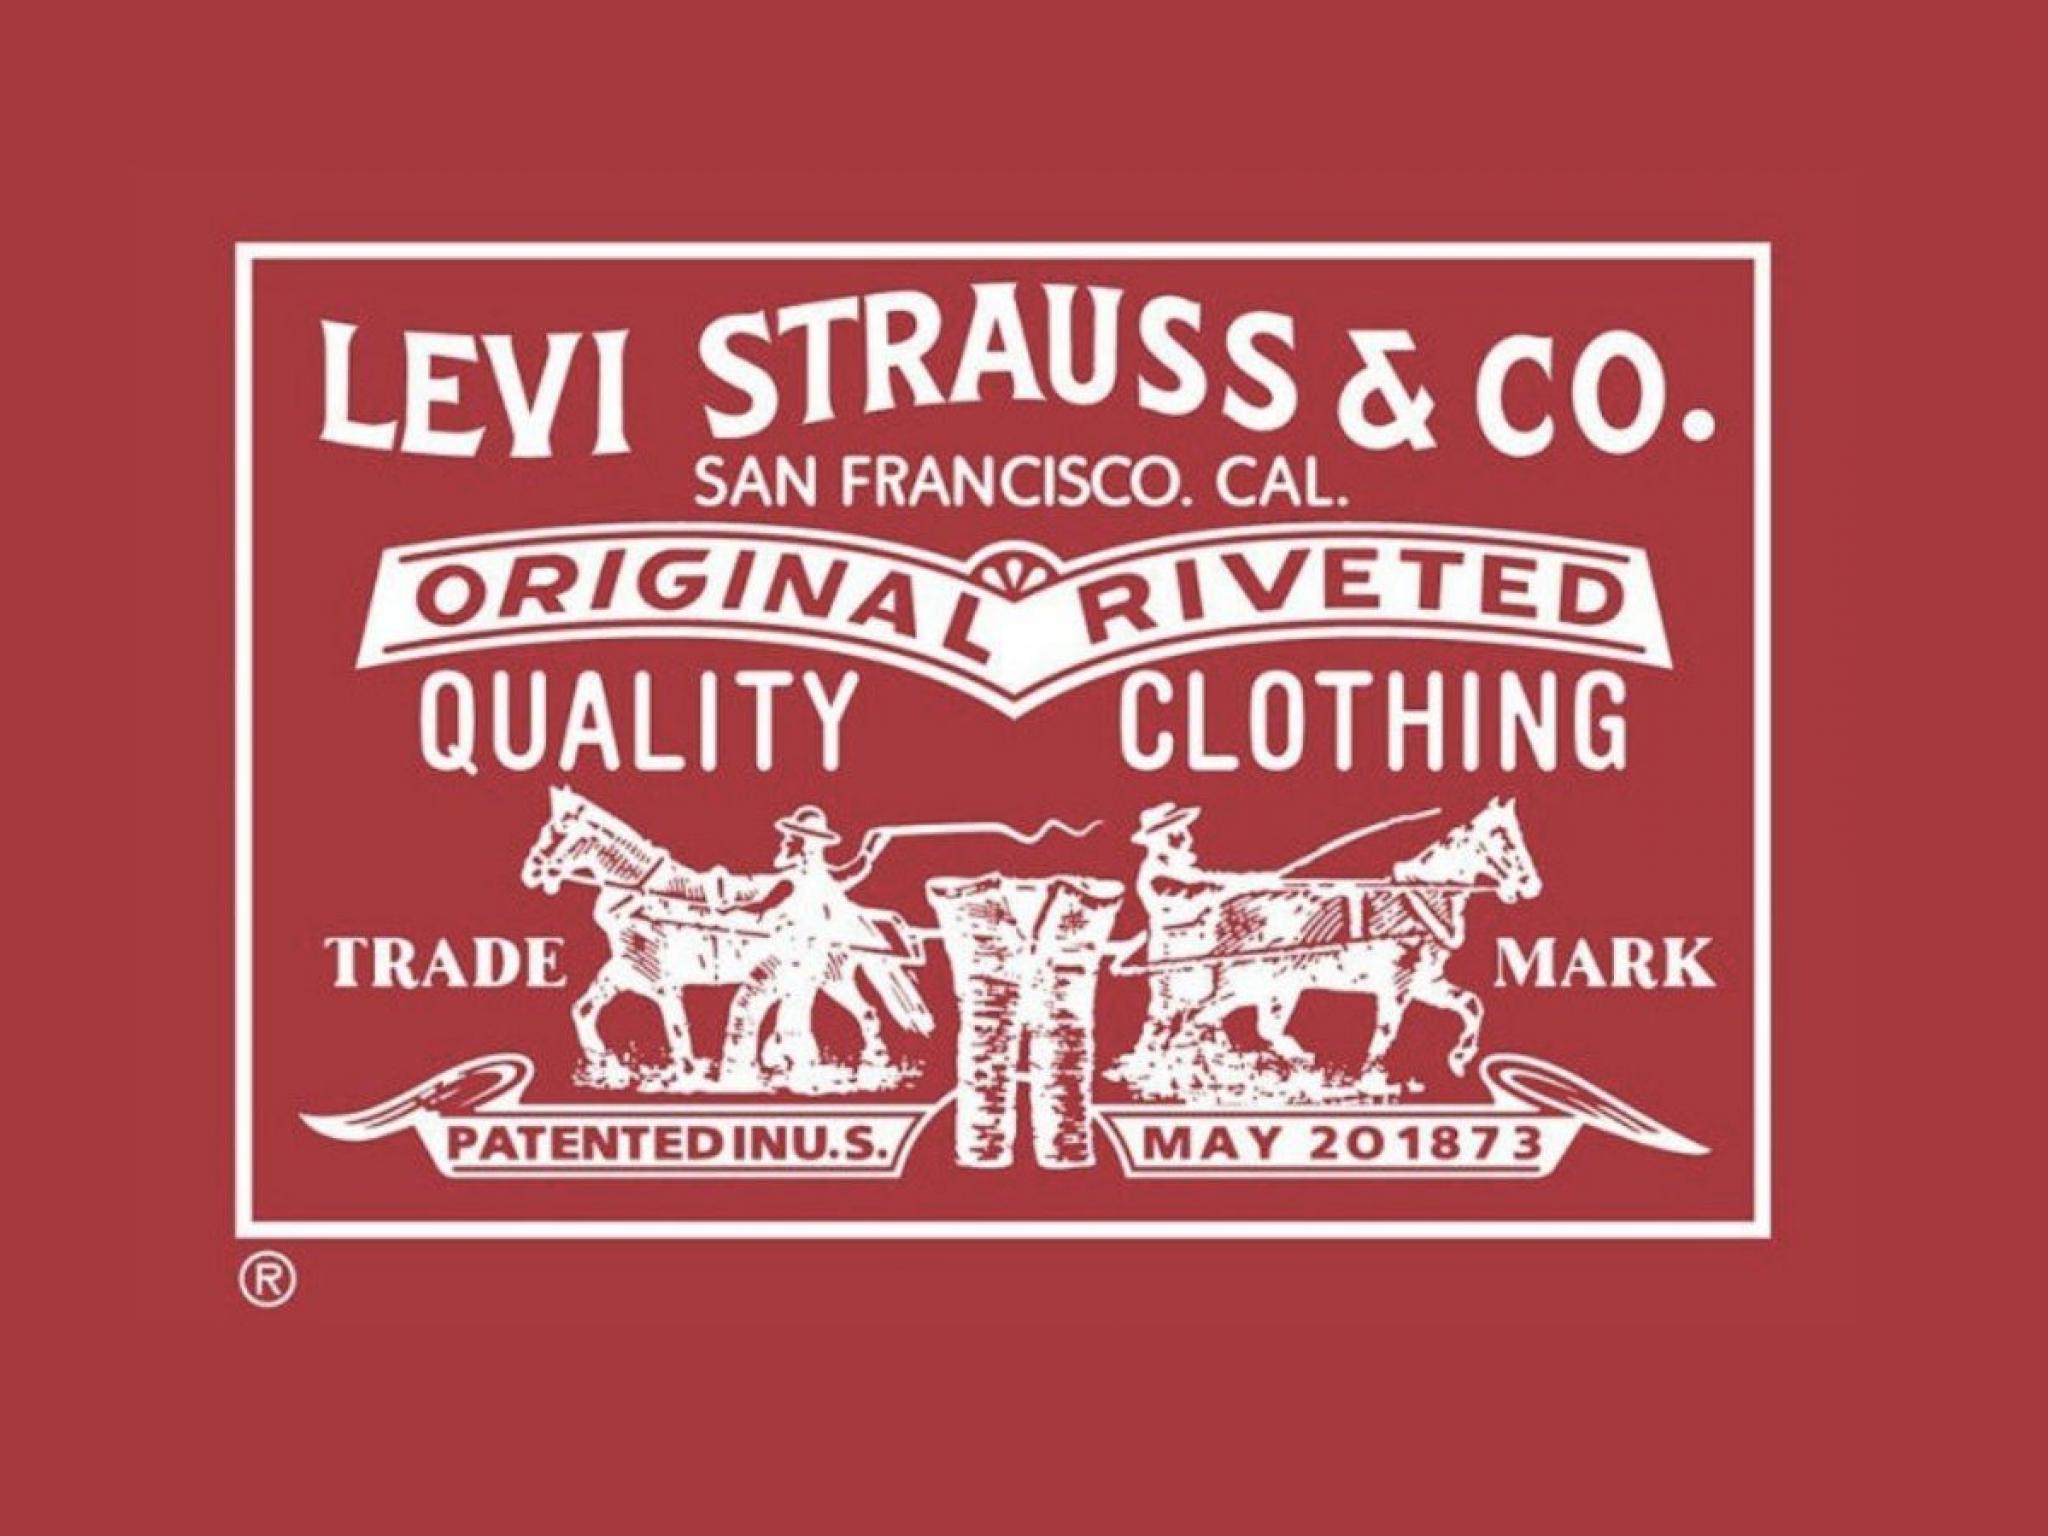  levi-strauss-aehr-test-systems-and-3-stocks-to-watch-heading-into-friday 